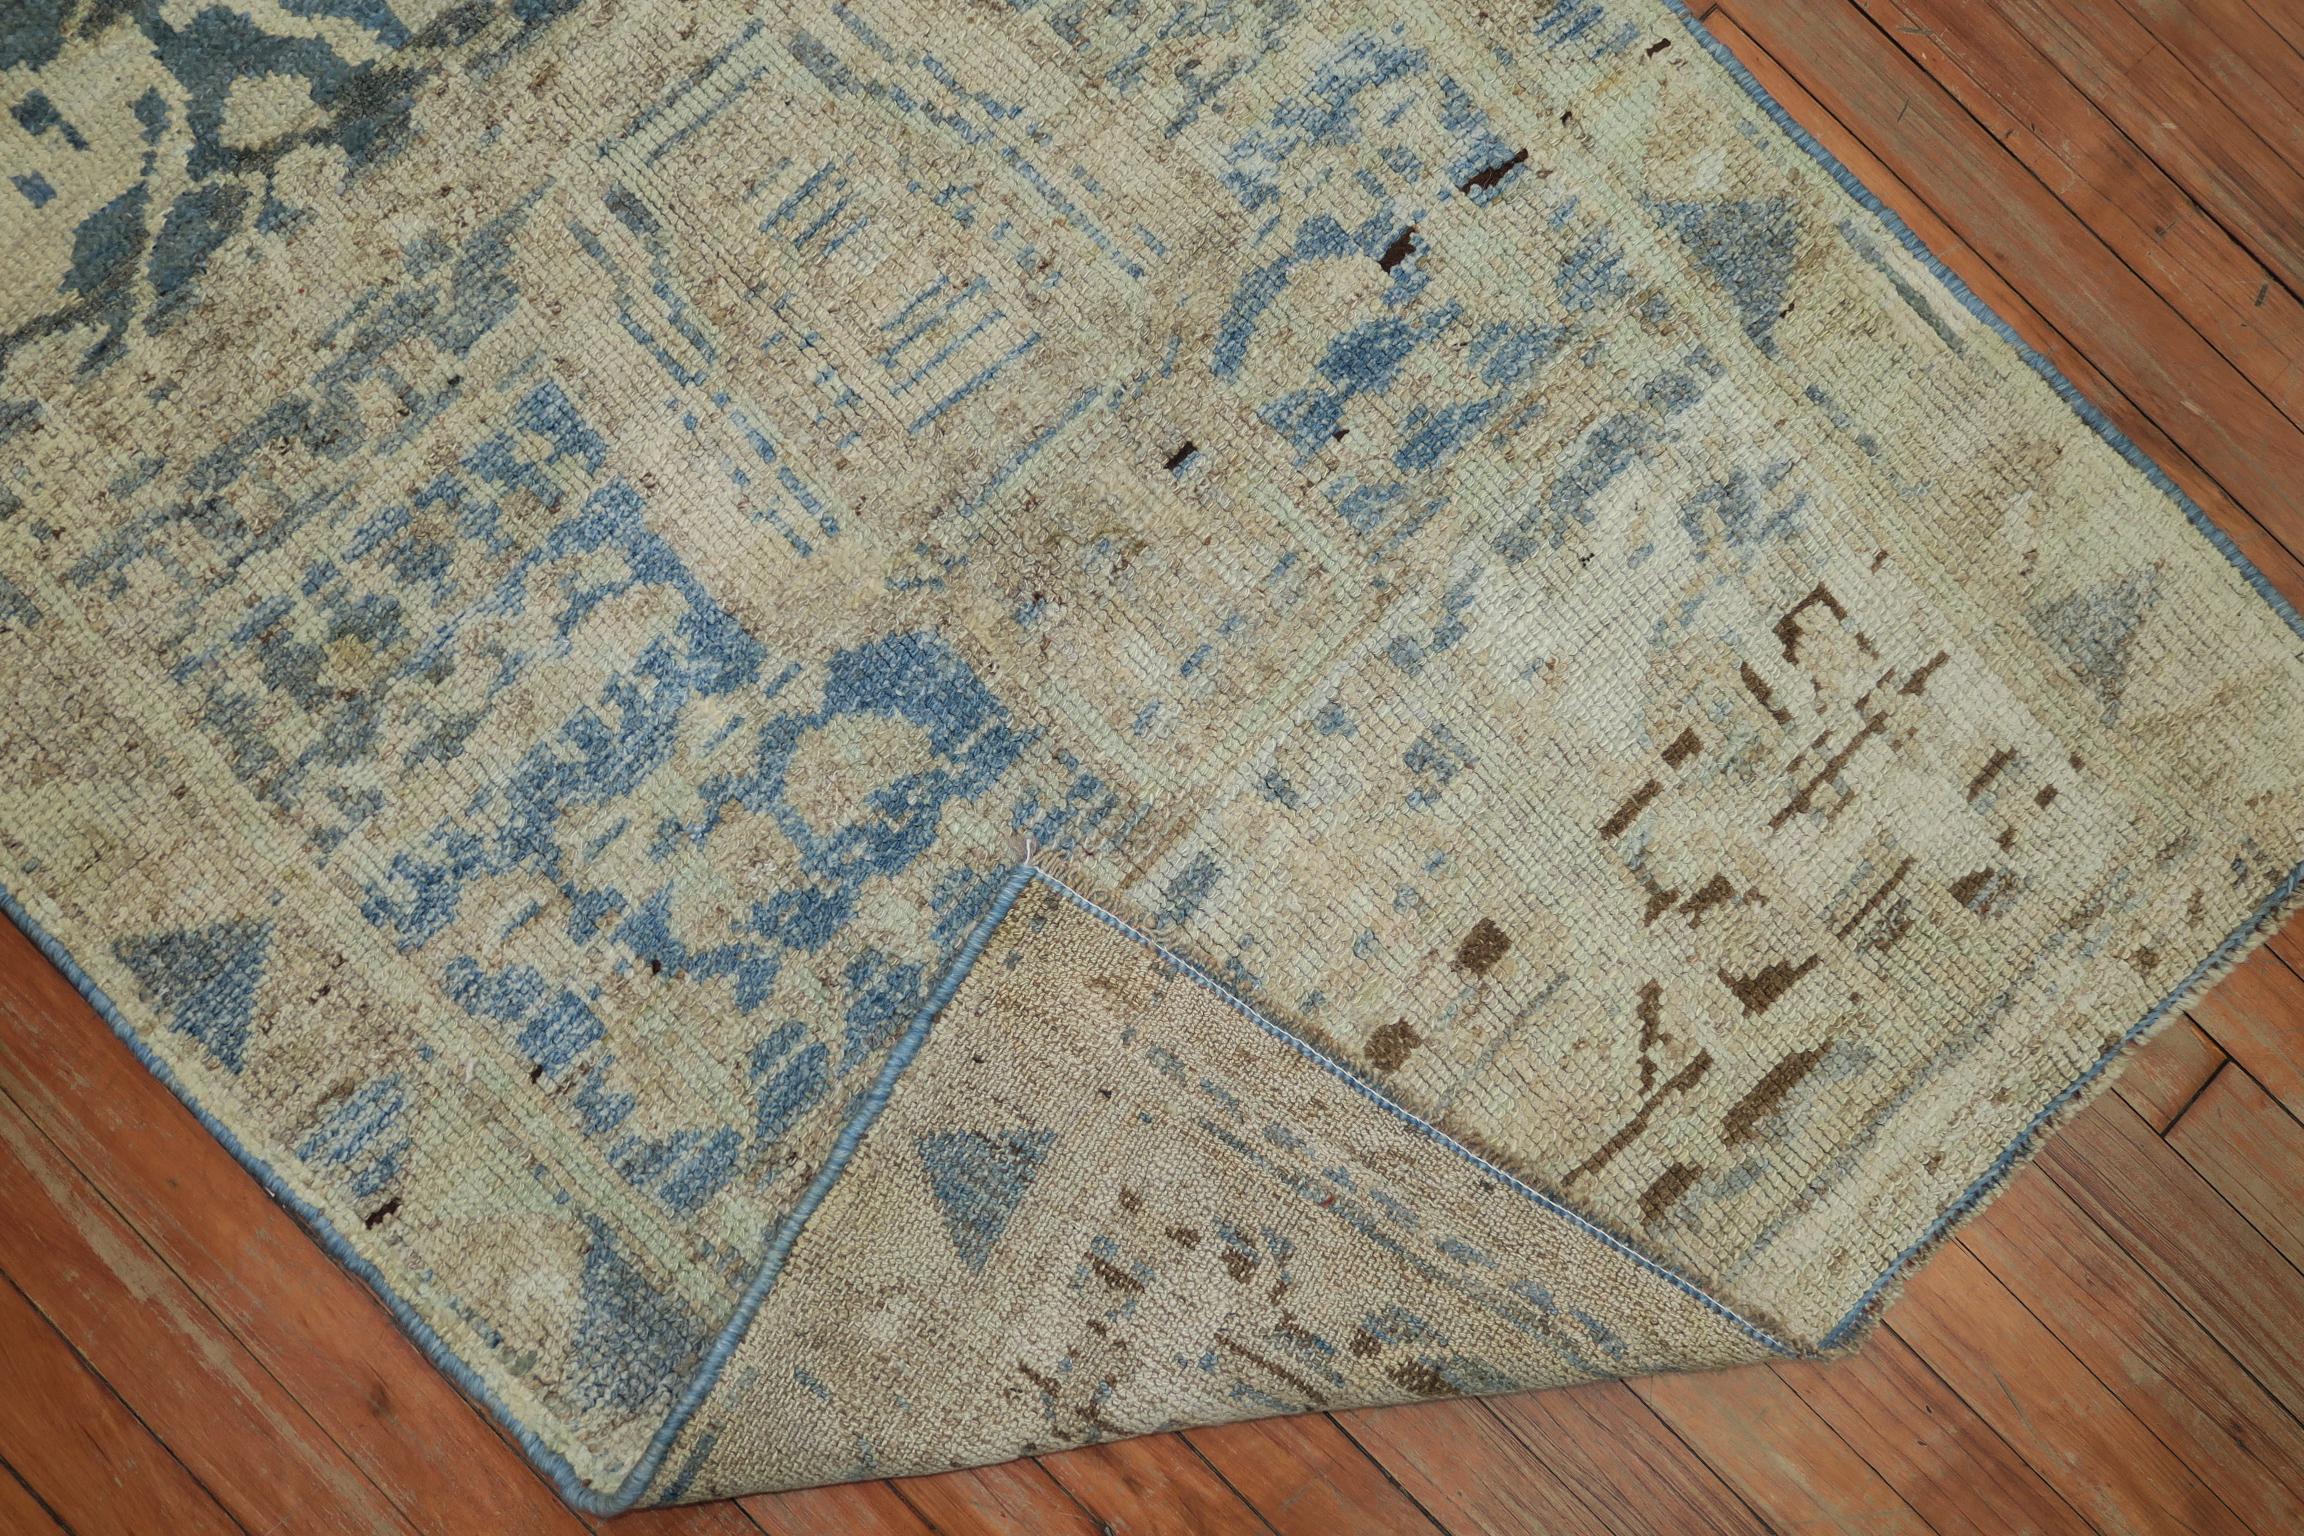 An eclectic rather abstract early 20th century Turkish Oushak rug in light blue and ivory tones. The wool is luscious. The motif is extremely unusually. It looks somewhat modern but antique at the same time

Measures: 3'2'' x 5'2''.